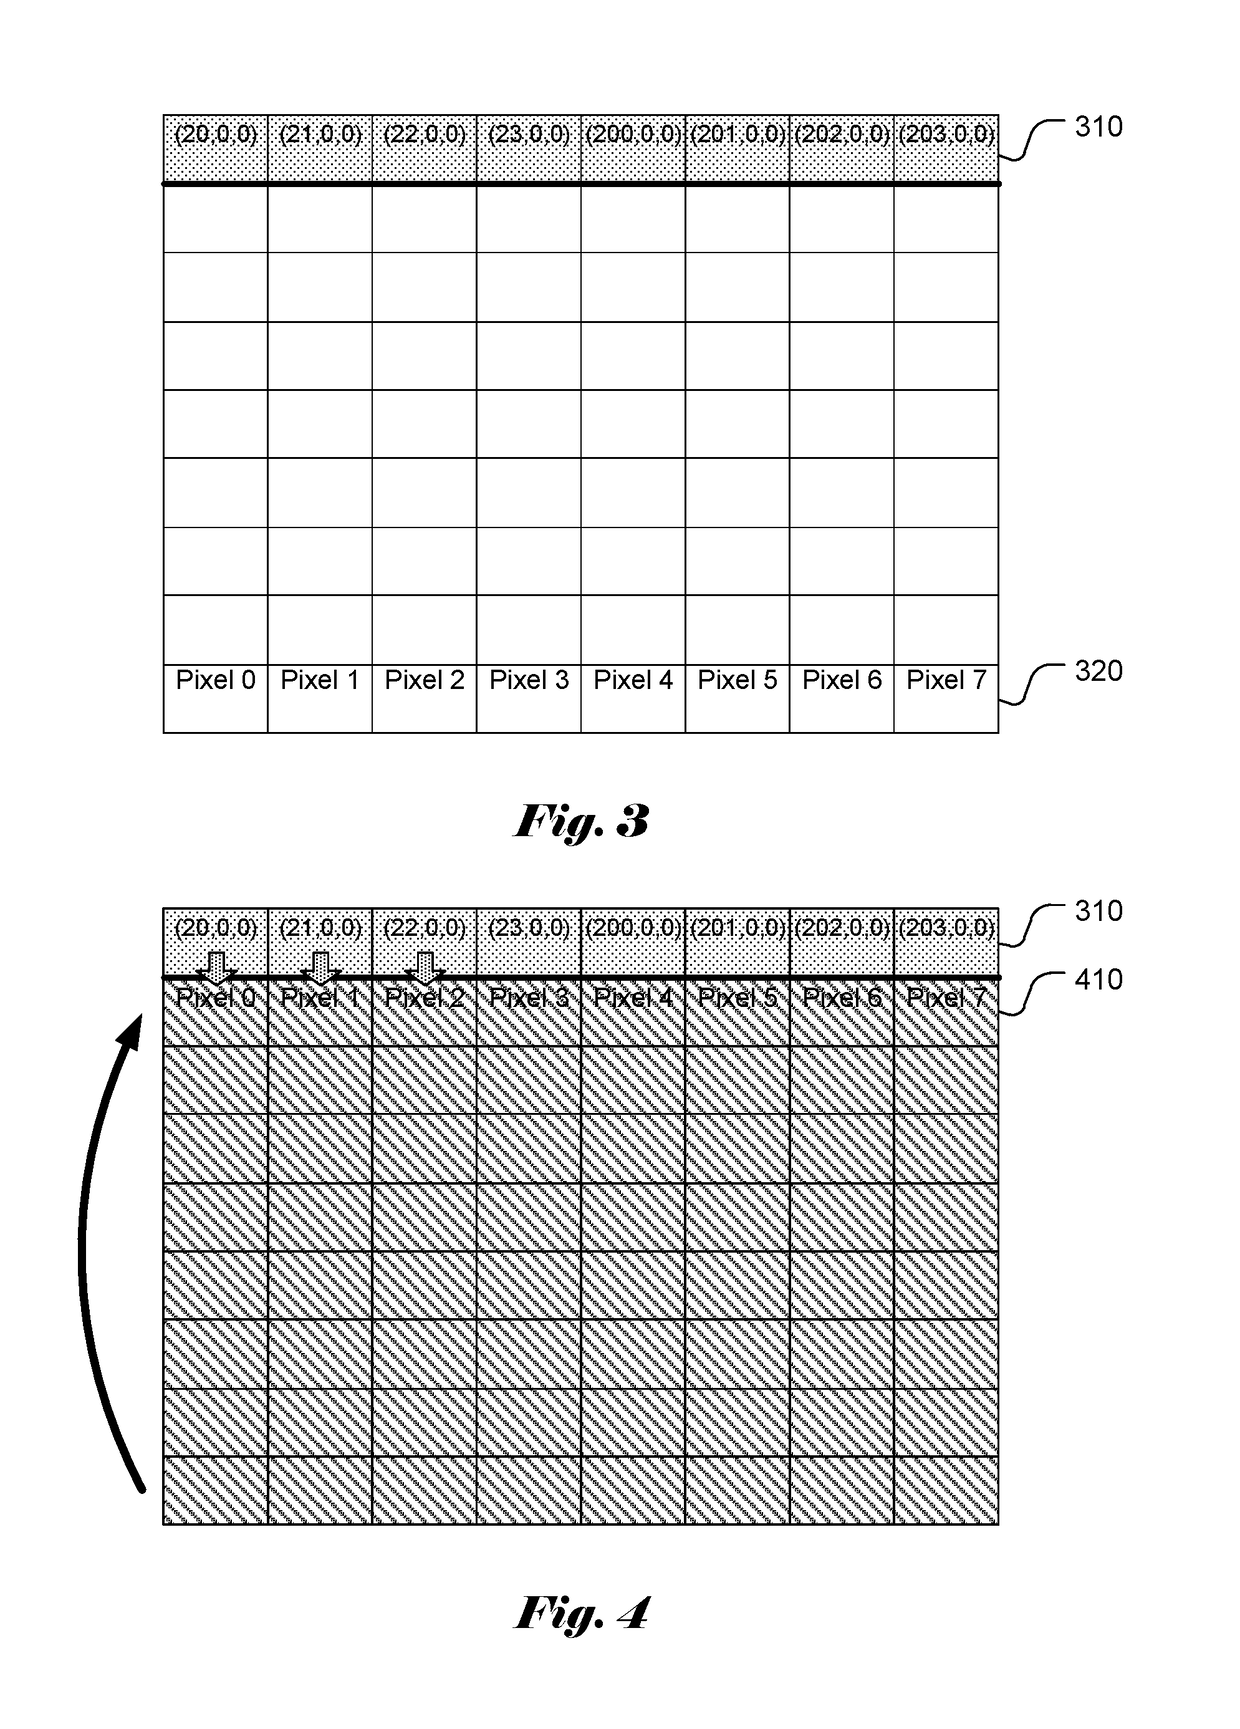 Method and Apparatus for Palette Index Coding in Video and Image Compression